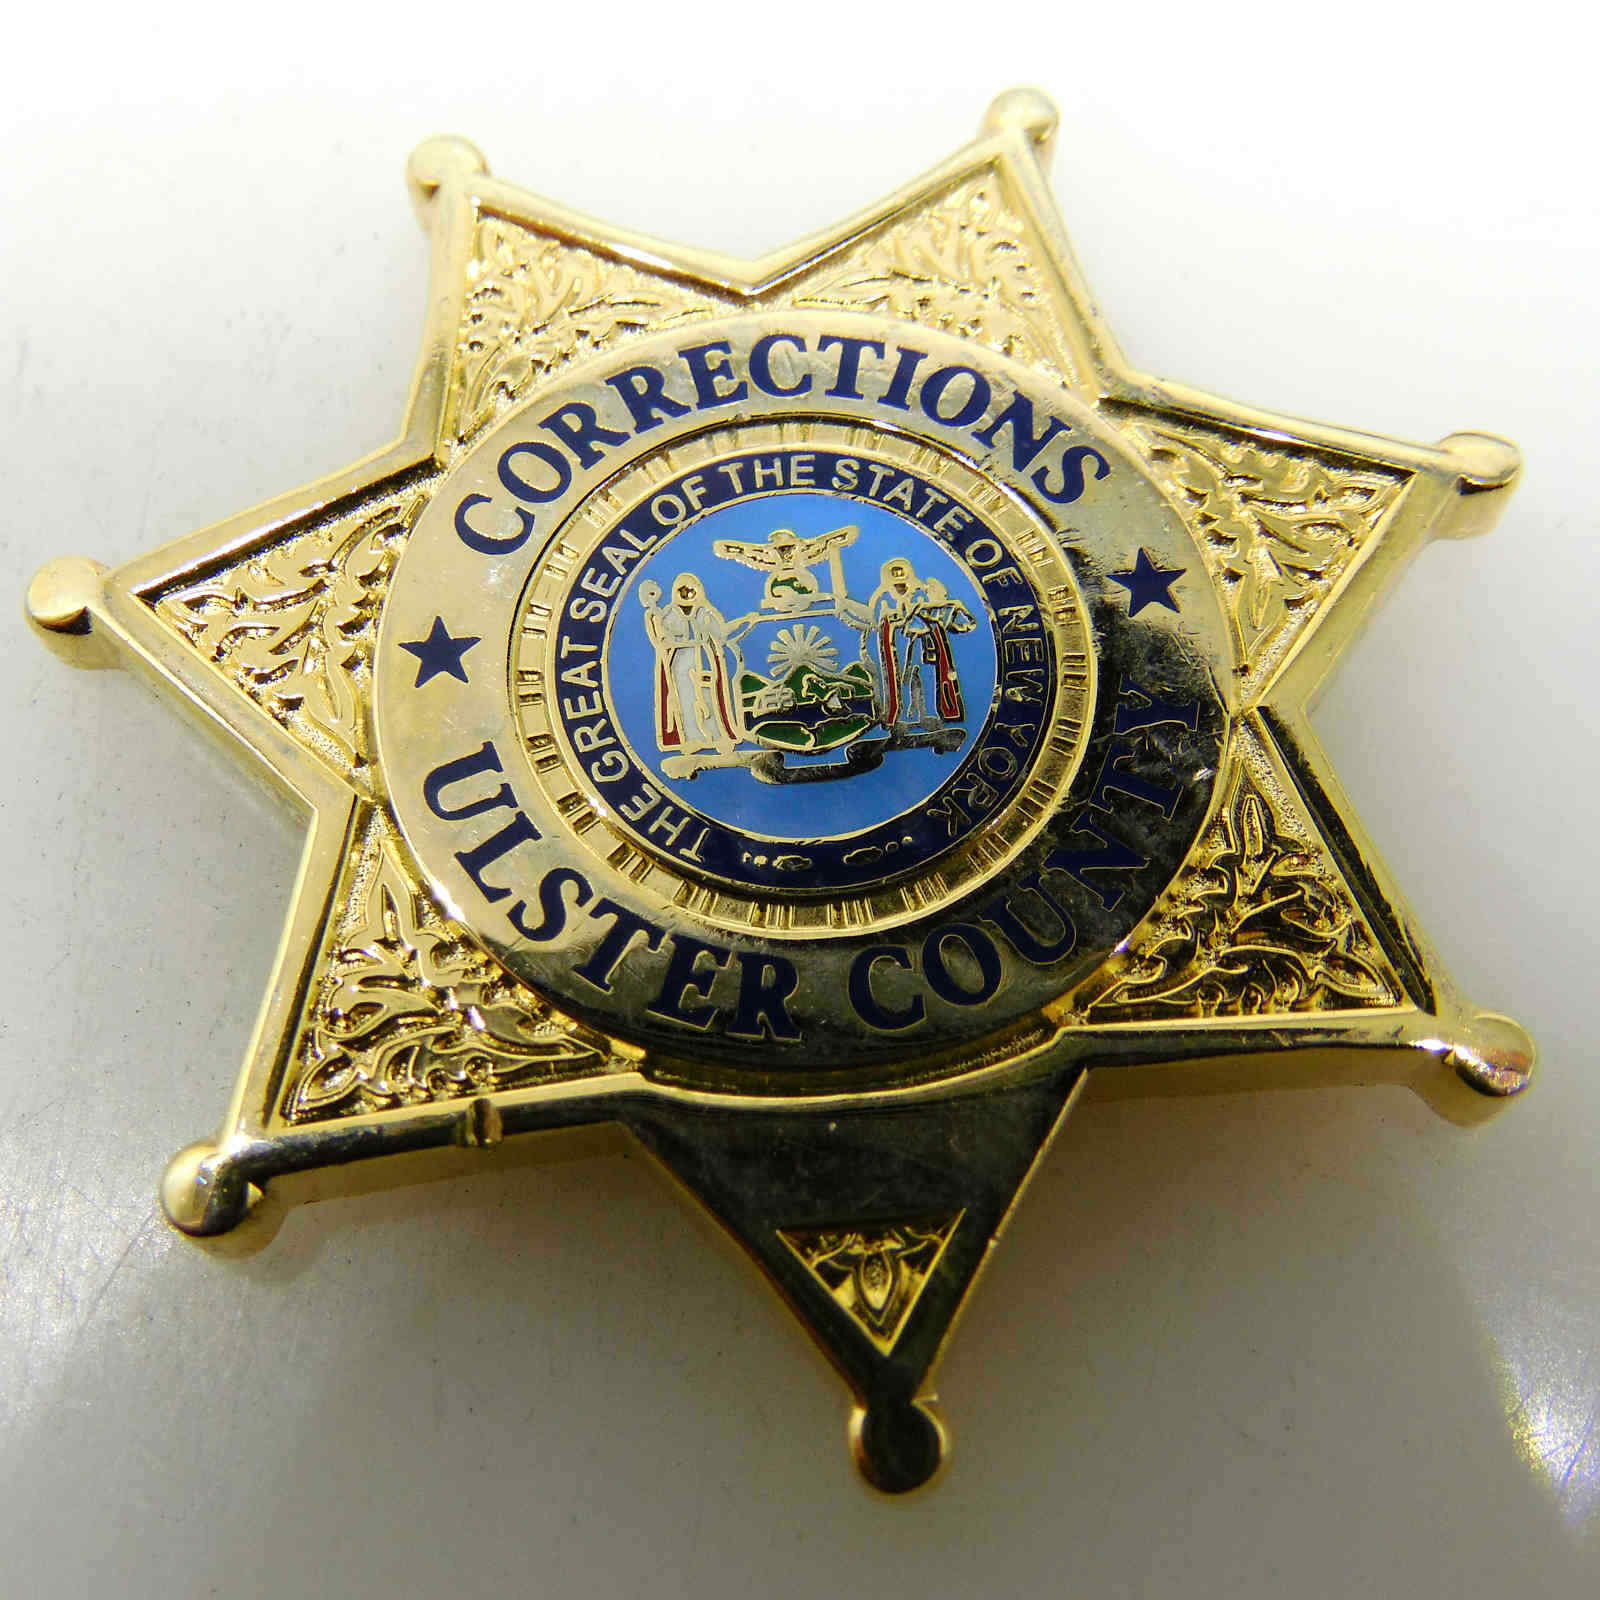 CORRECTIONS ULSTER COUNTY DEPUTY SHERIFF CHALLENGE COIN